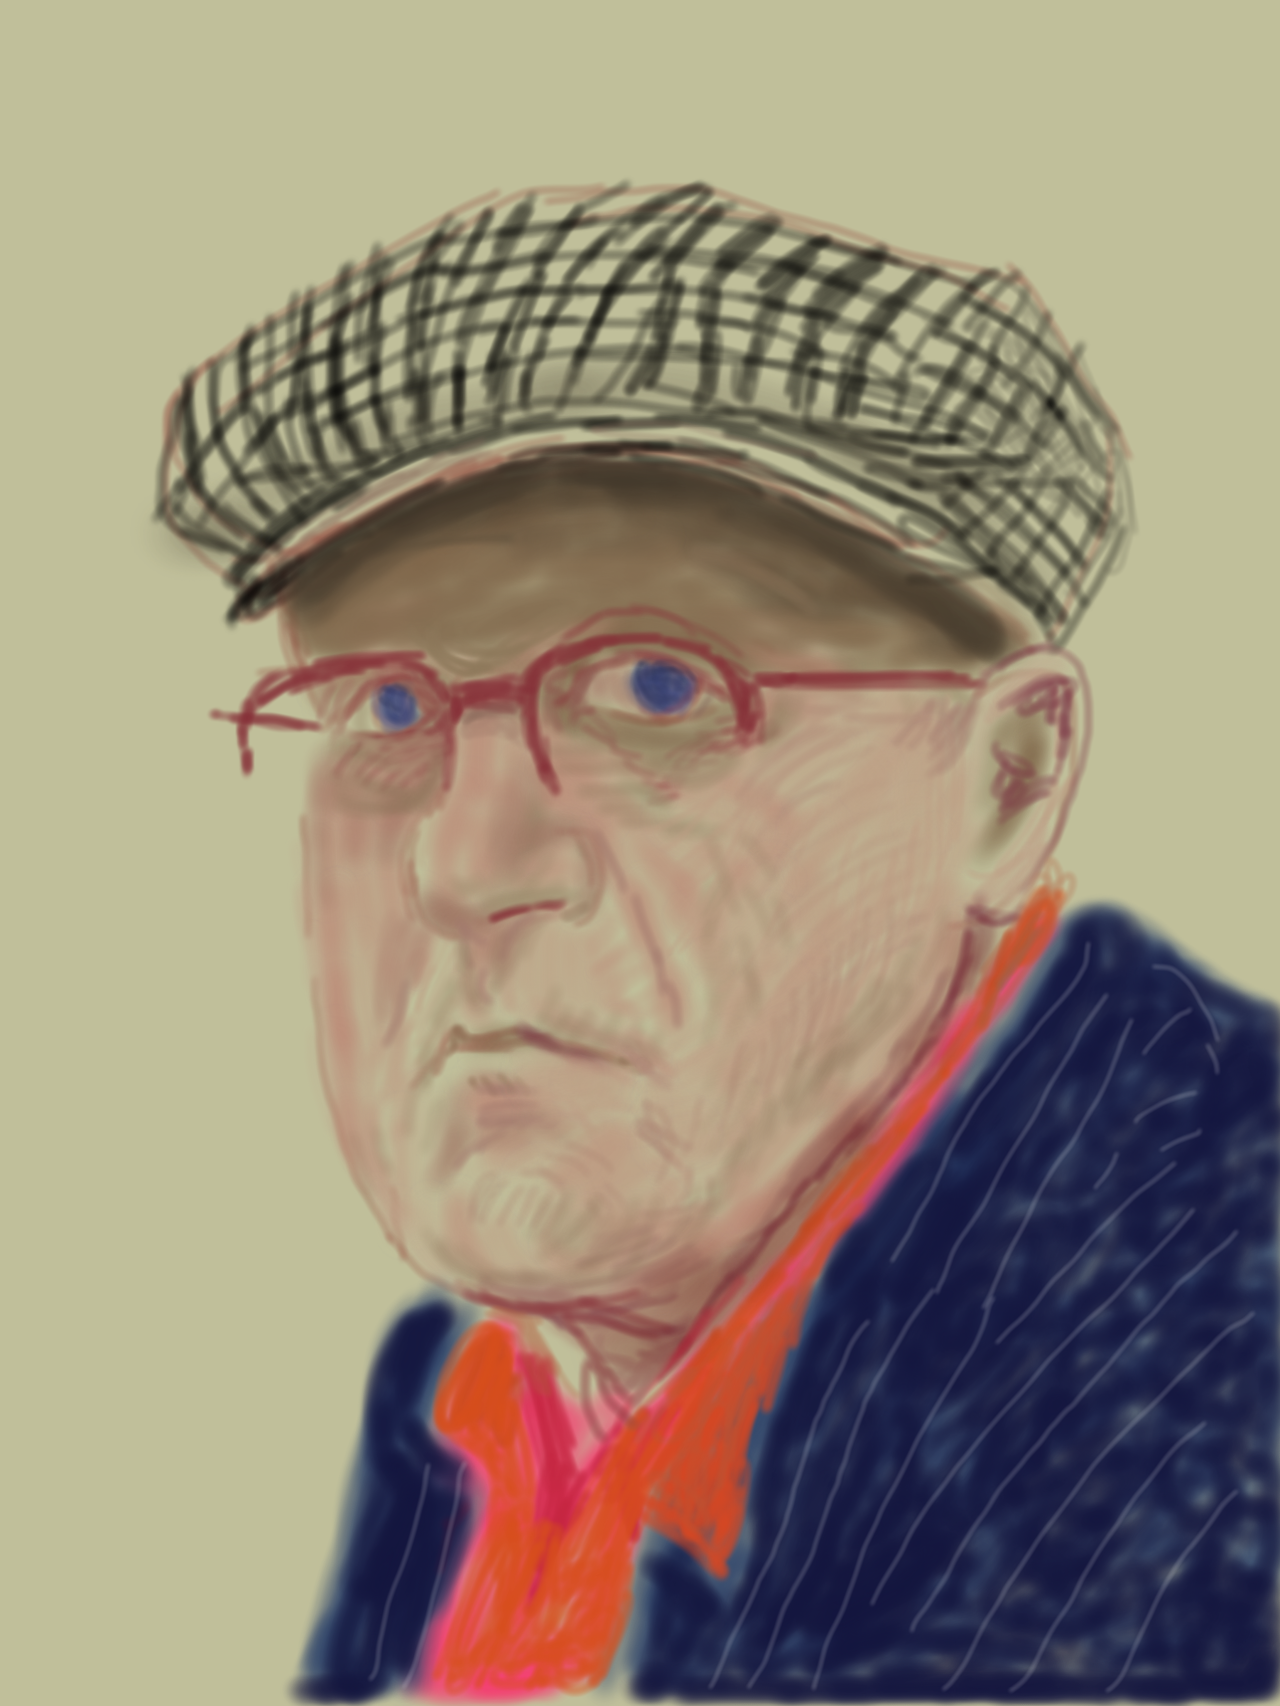 David Hockney Self Portrait, March 14 2012, iPad drawing printed on paper Exhibition Proof 37 x 28